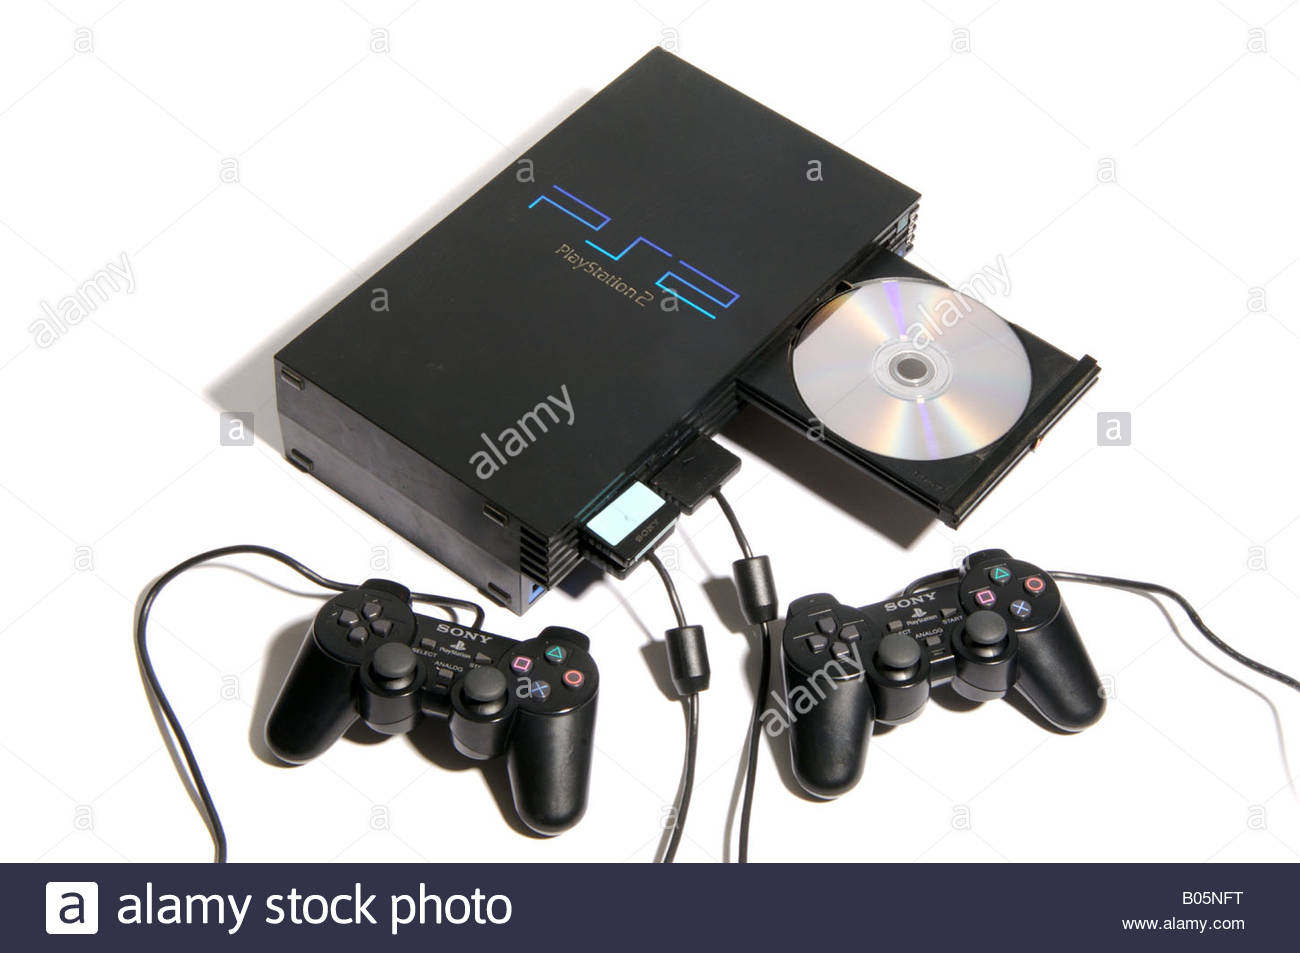 Sony Playstation Ps2 On White Background Stock Photo